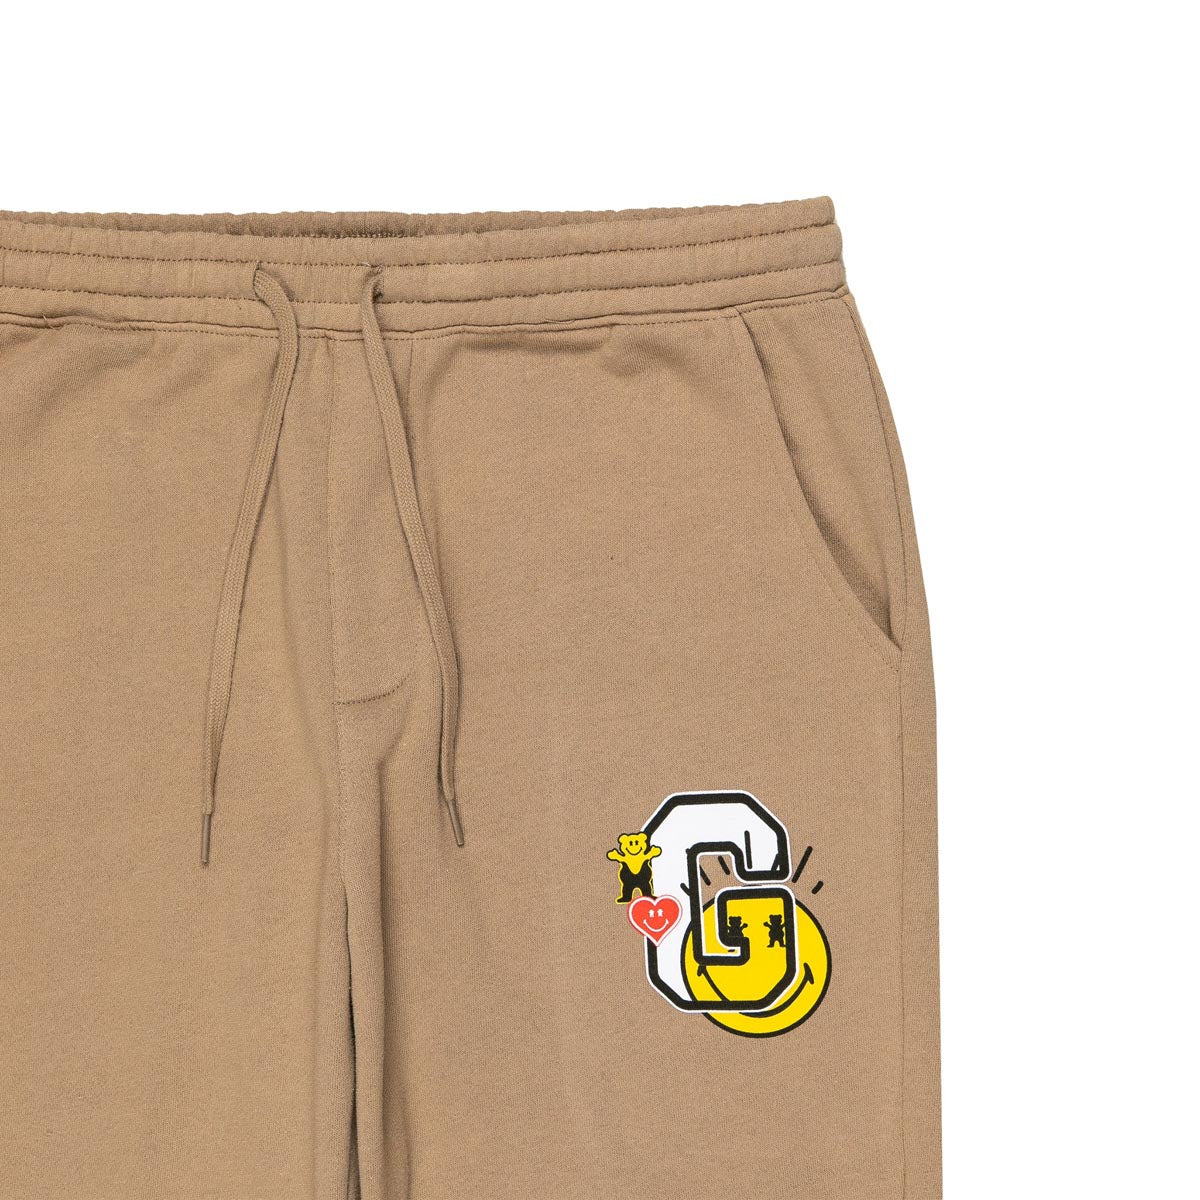 Grizzly x Smiley World Sweat Pants - Tan image 5